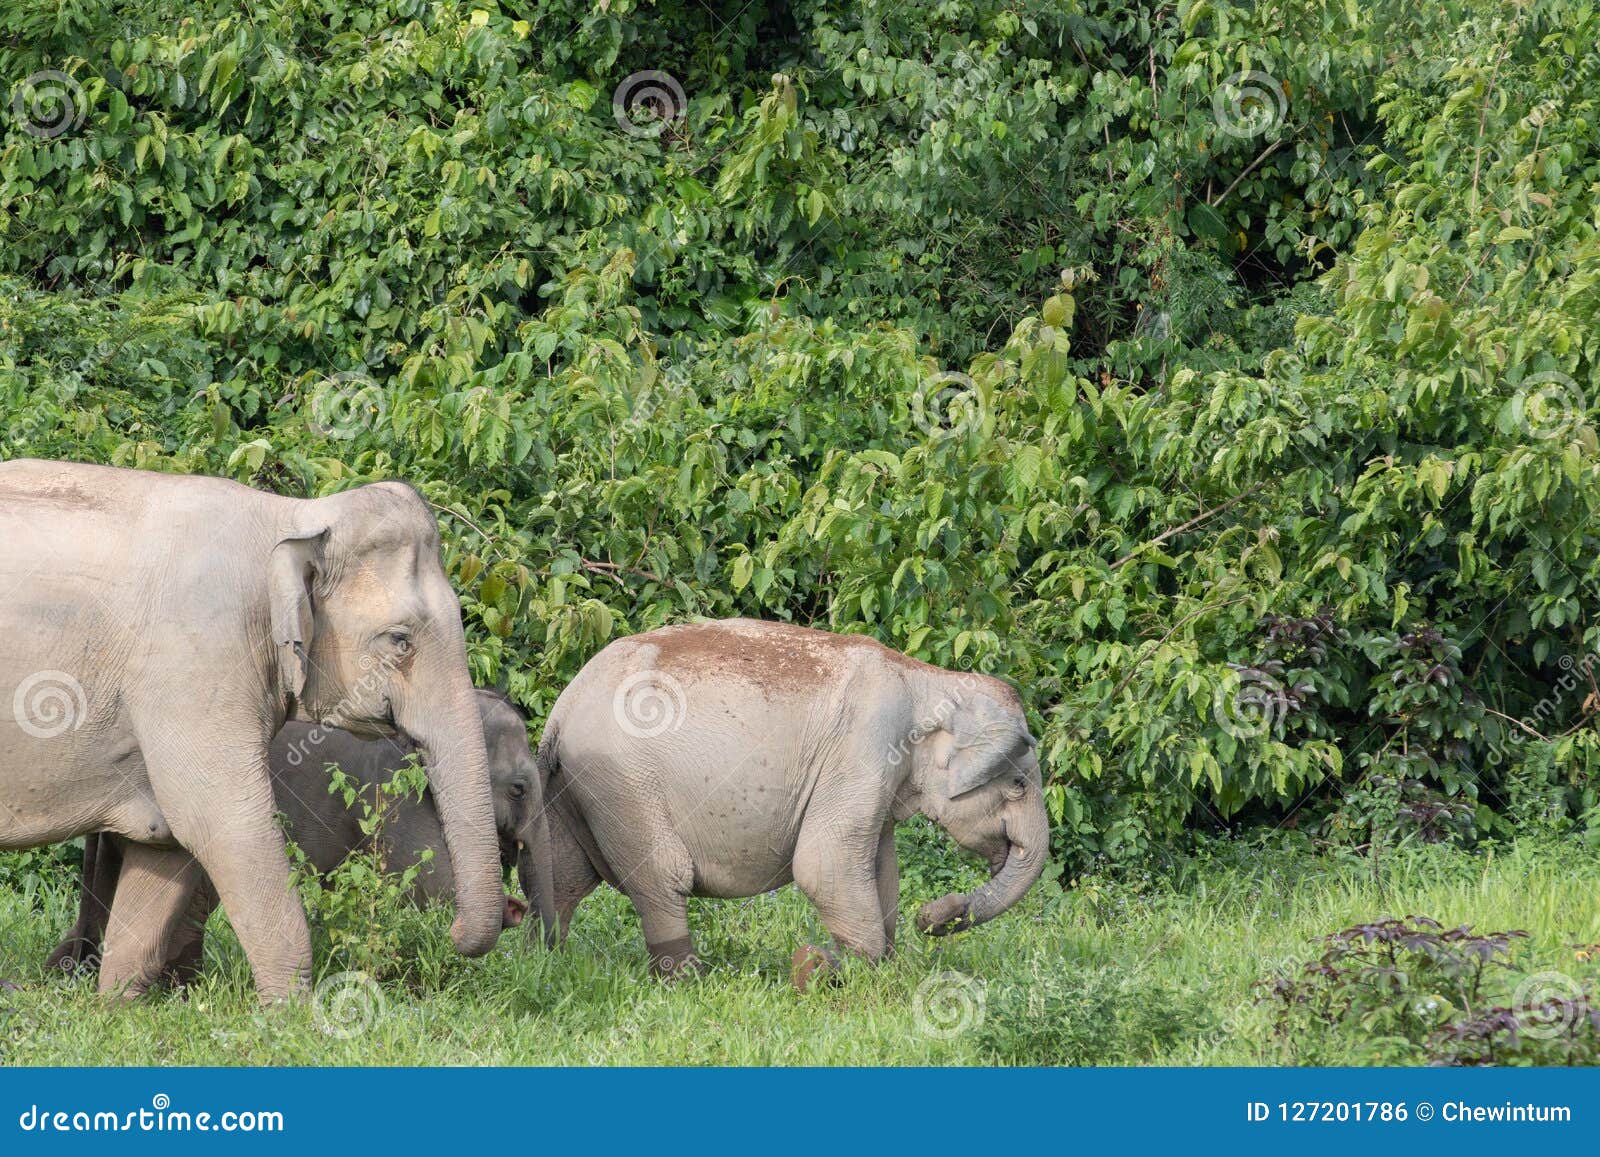 Asiatic Elephant is Big Five Animal in Asia Stock Photo - Image of cute,  ears: 127201786